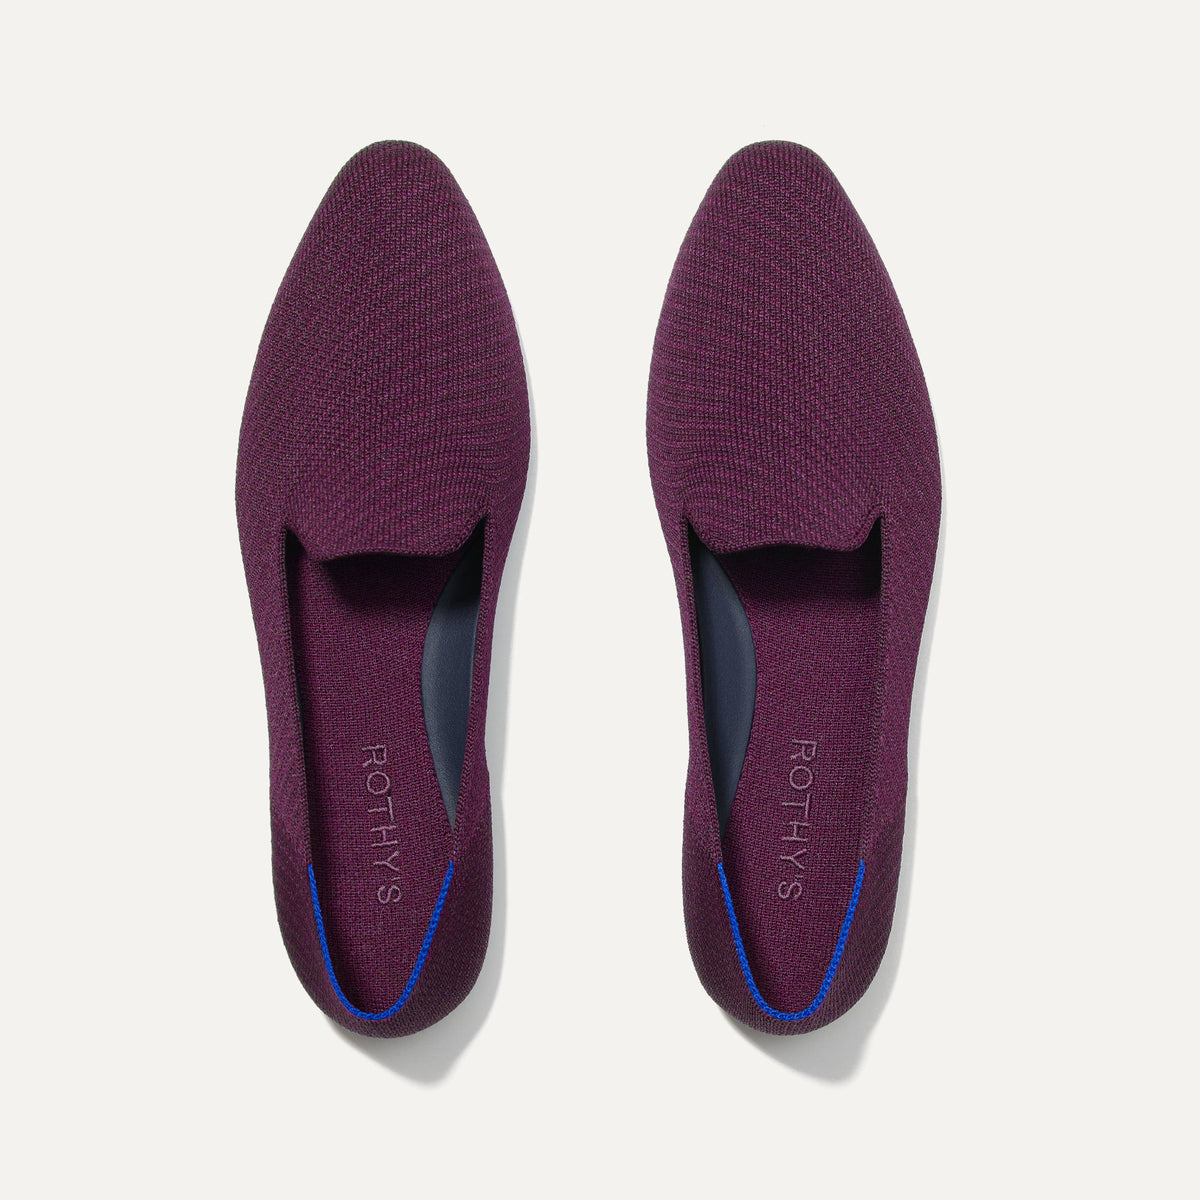 Almond Toe Penny Loafer in Plum Twill | Women's Shoes | Rothy's